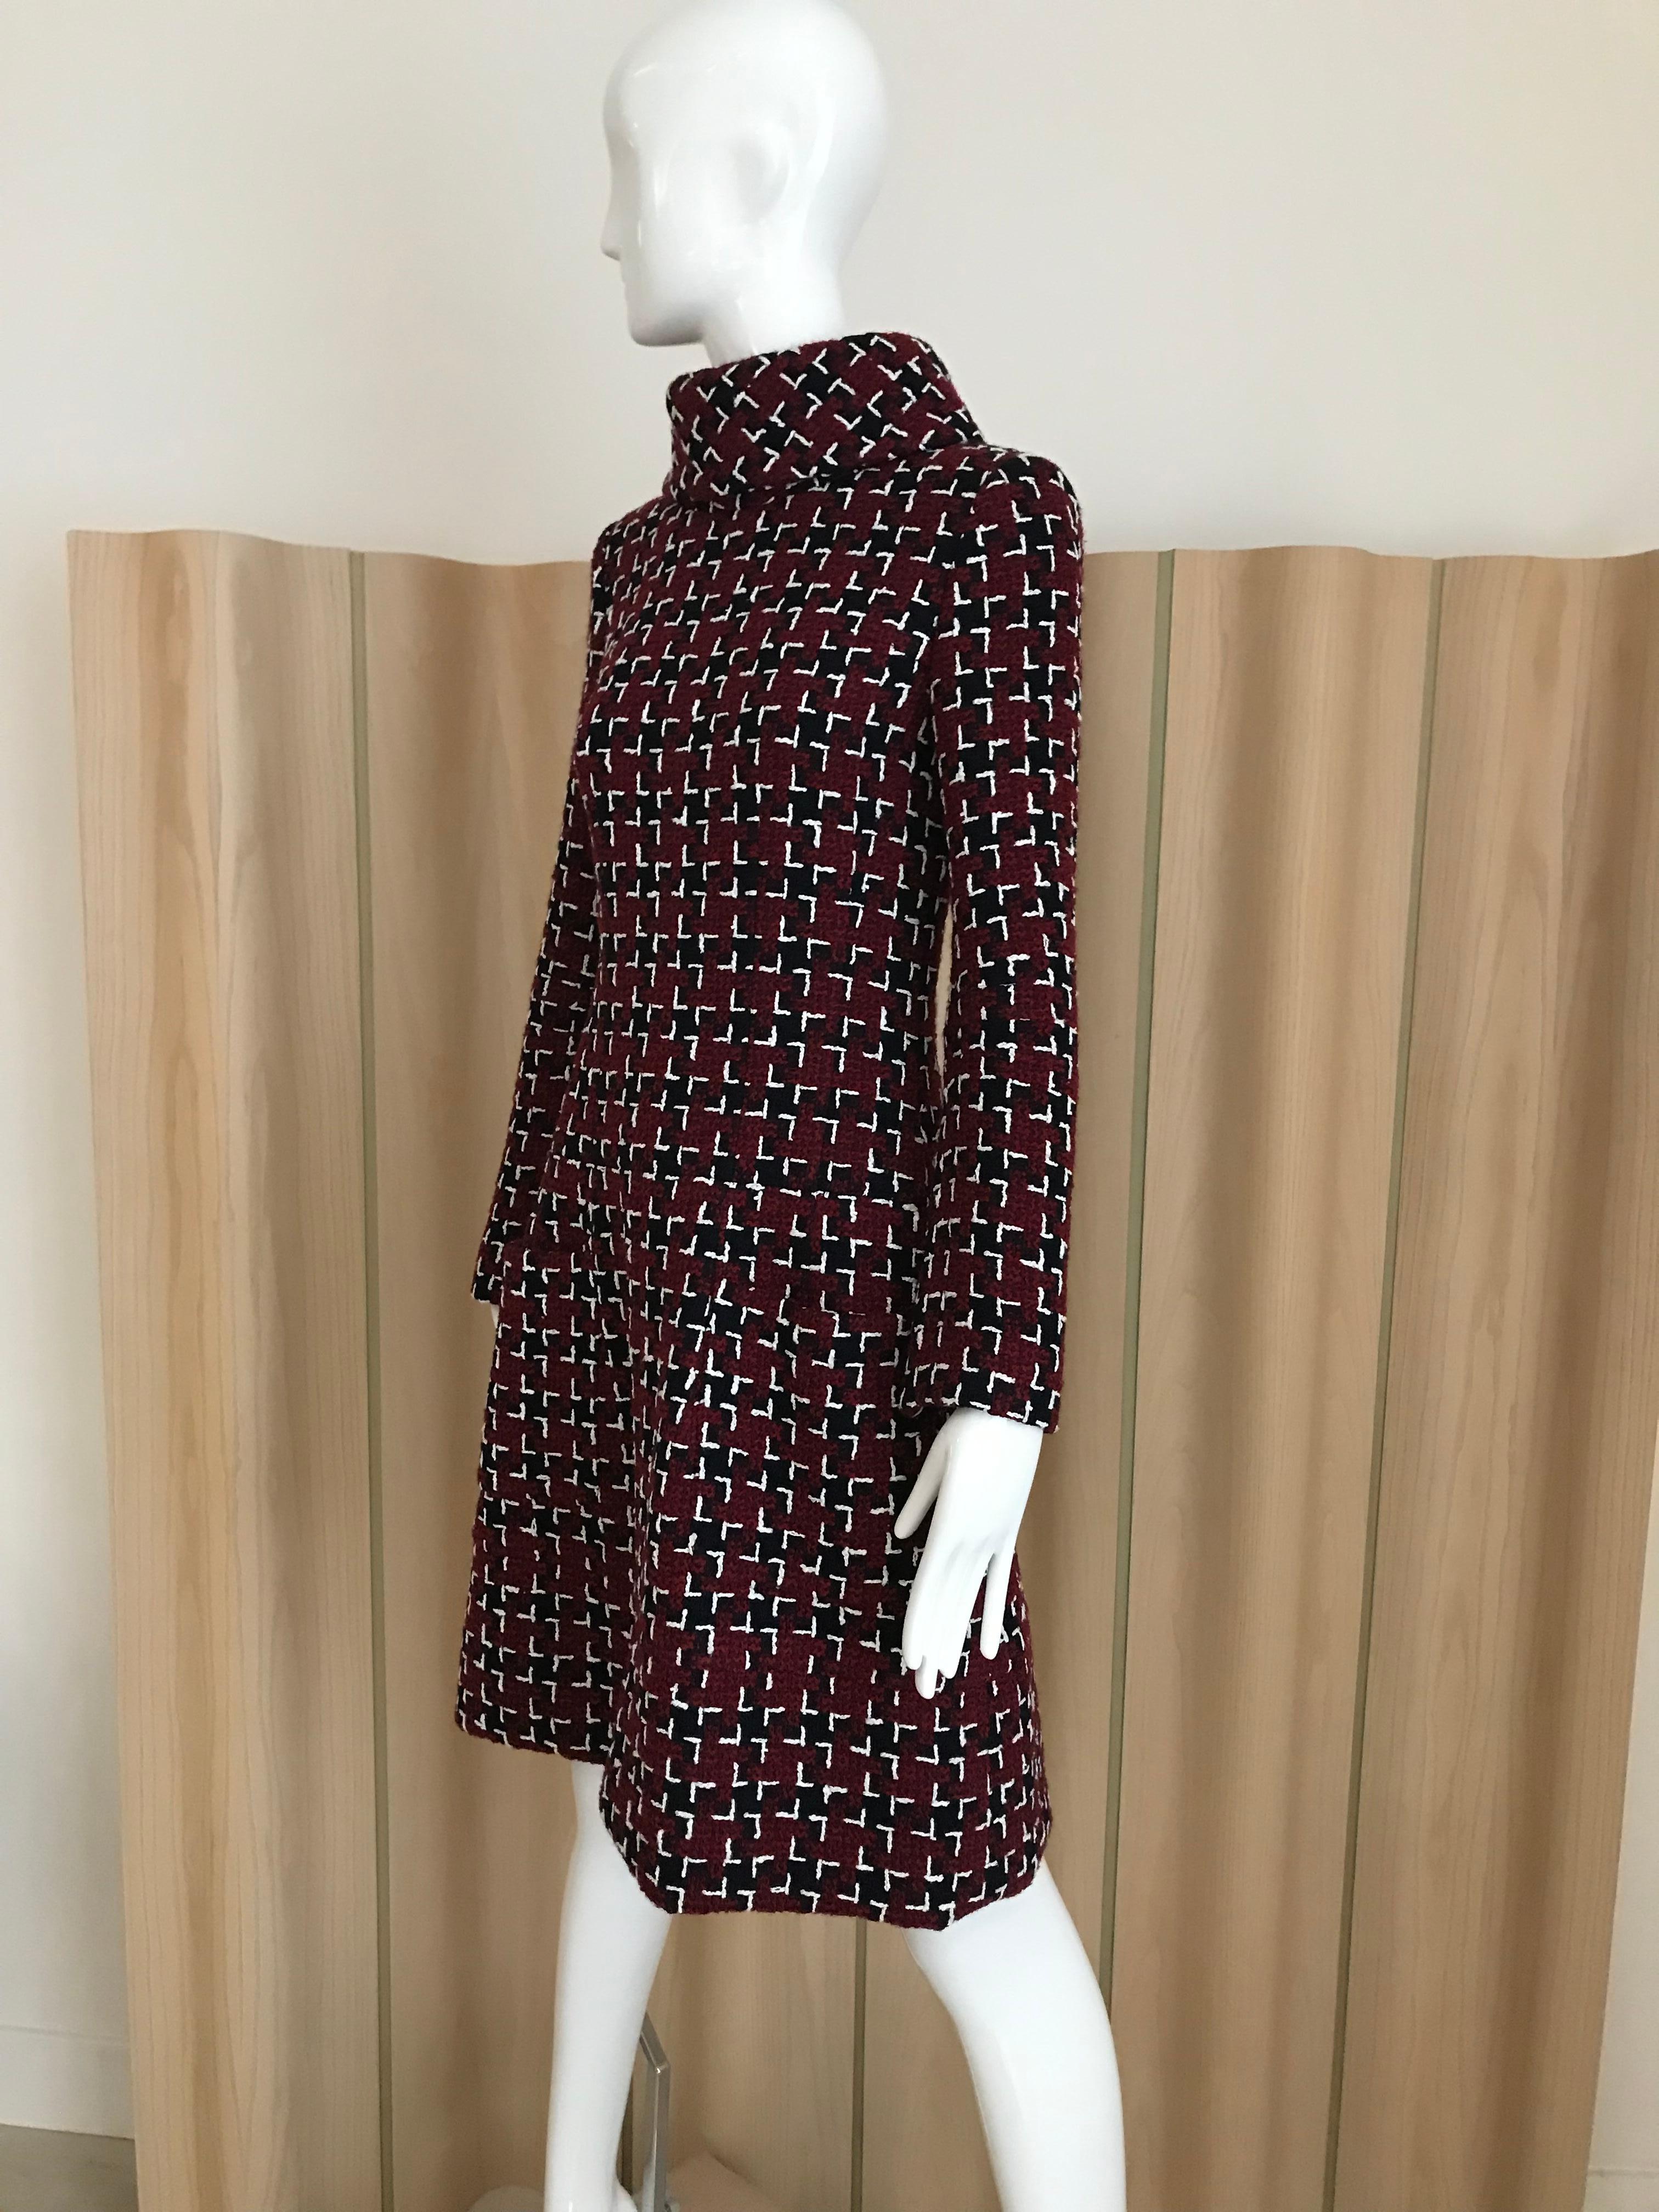 Chanel long sleeve dress with Interesting pattern of tweed in burgundy, white and black dress with mock neck and pockets. Dress is lined in silk. New With Tag
Marked size: 34
Measurement: BUST: 32 inch/ WAIST: 28inch / HIP: 36 inch/ LENGTH: 37